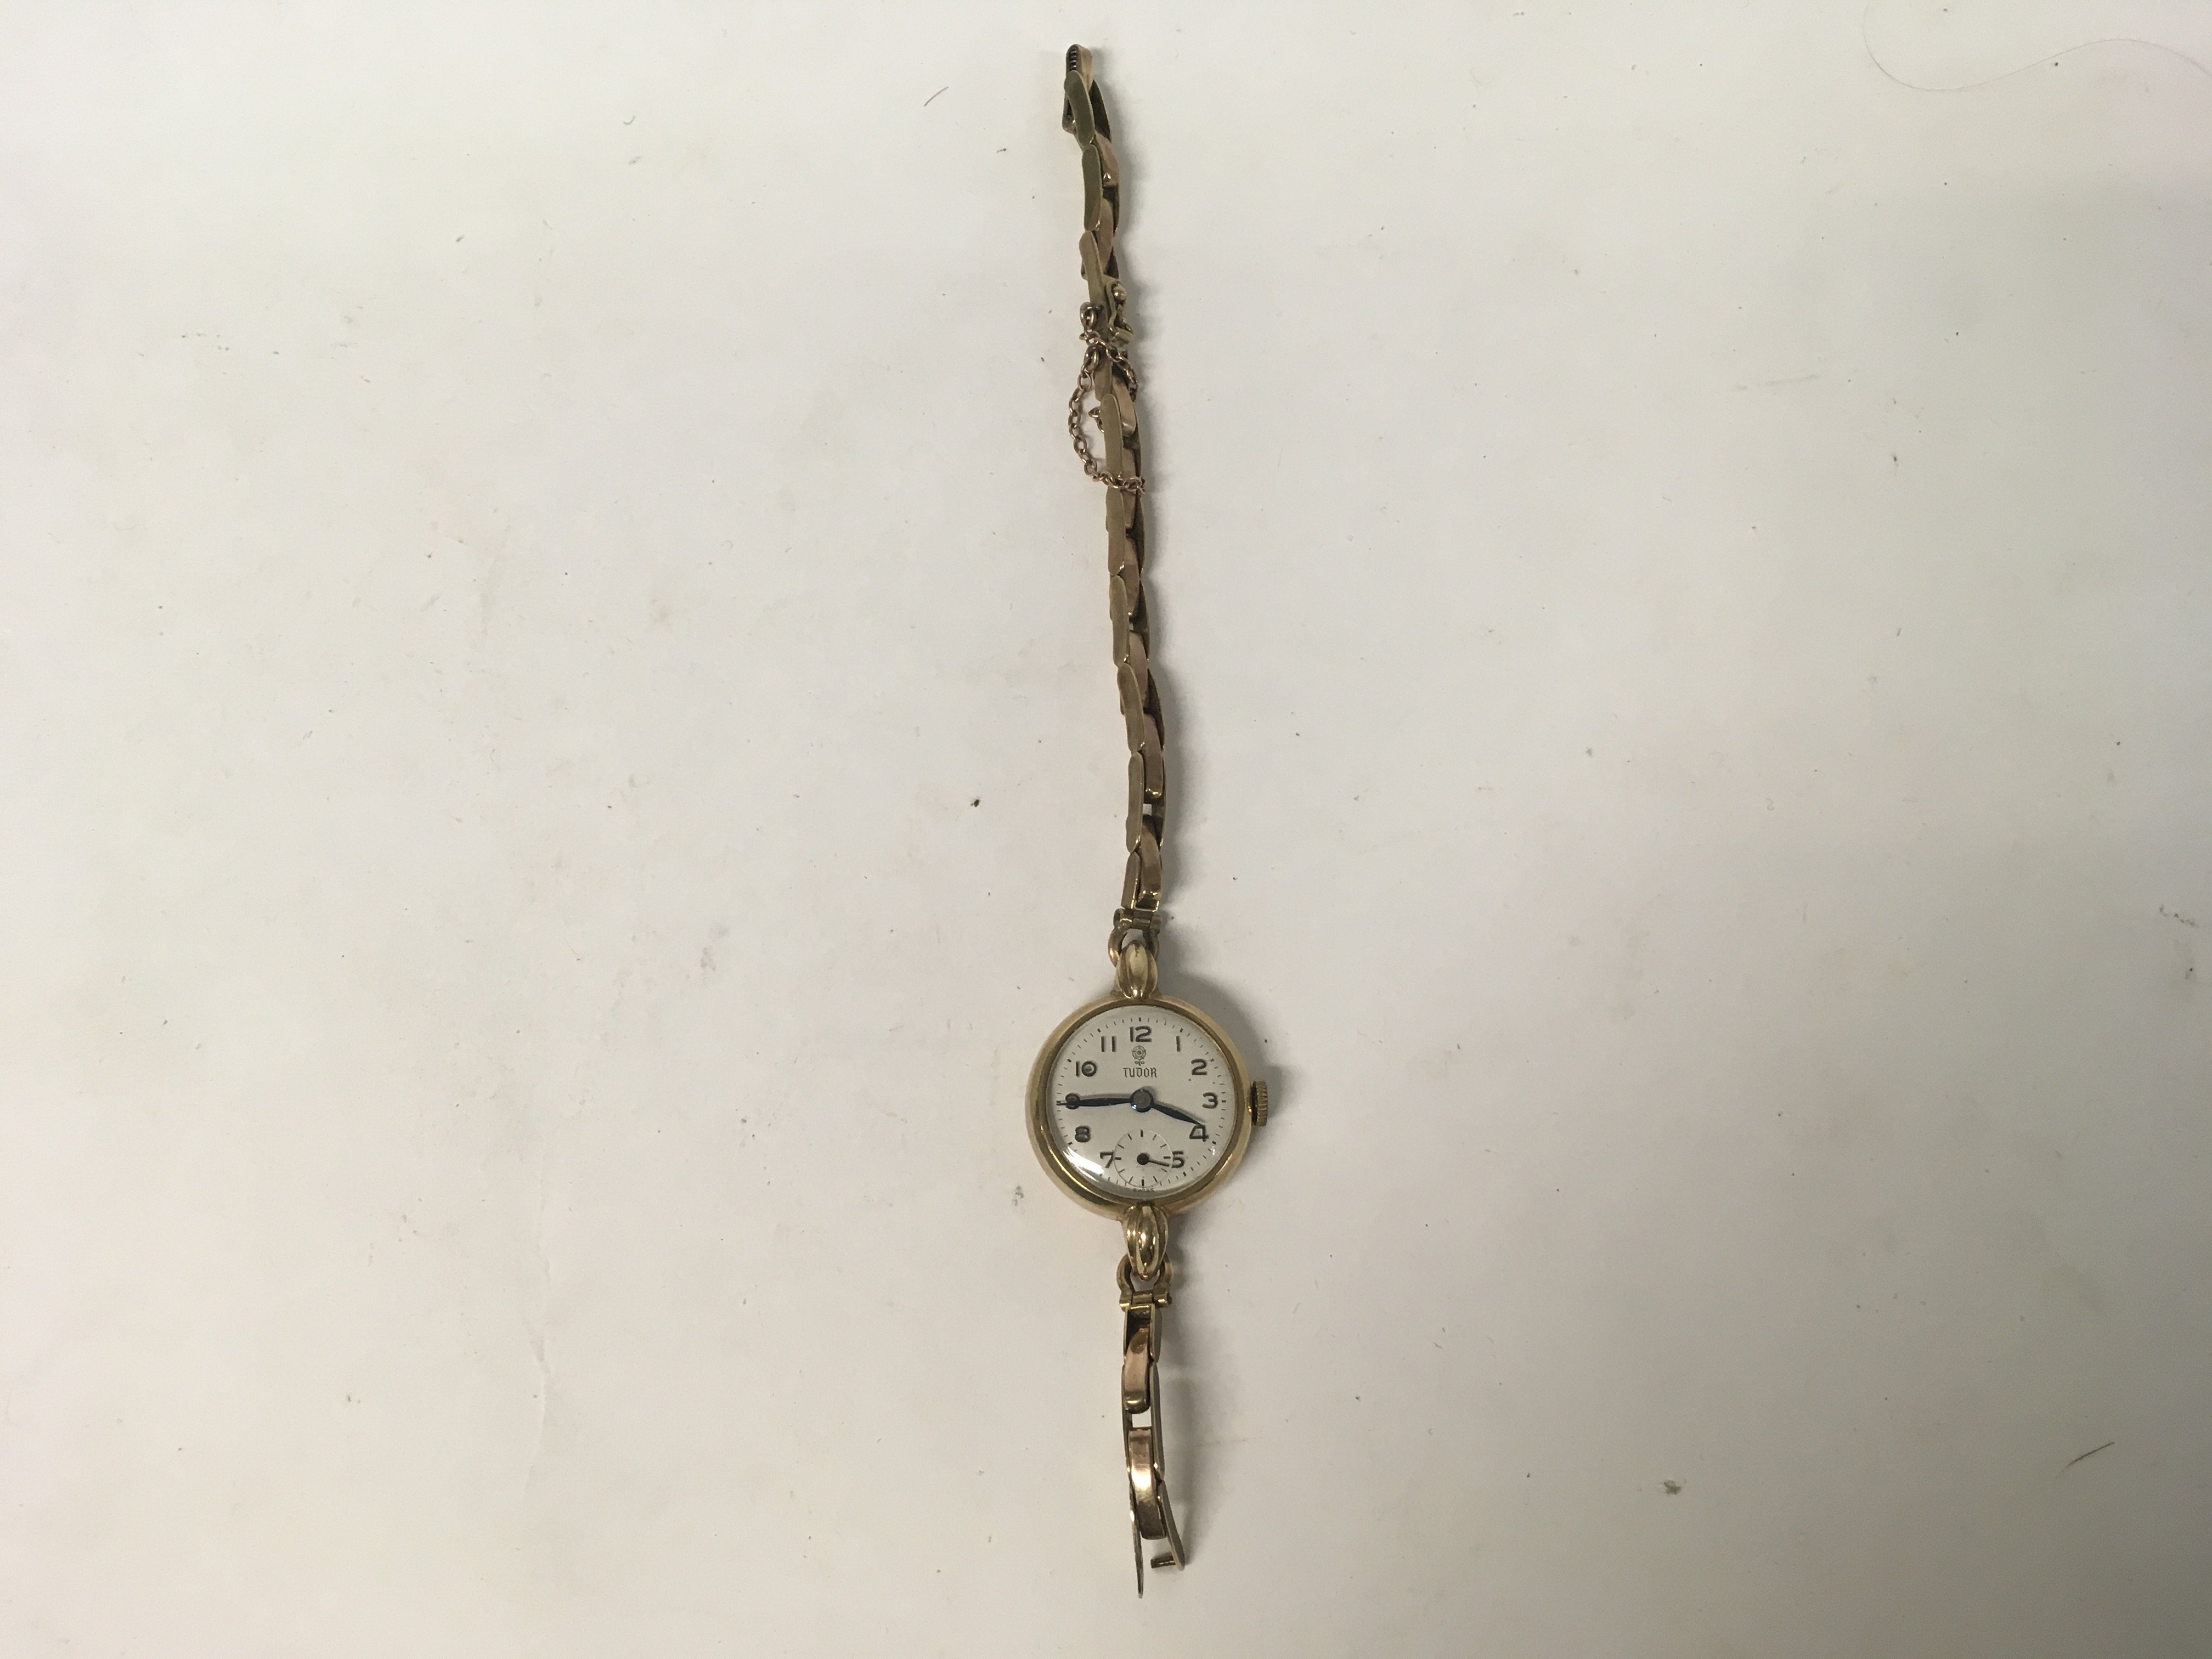 Tudor Gold watch with a plated strap - Image 4 of 6